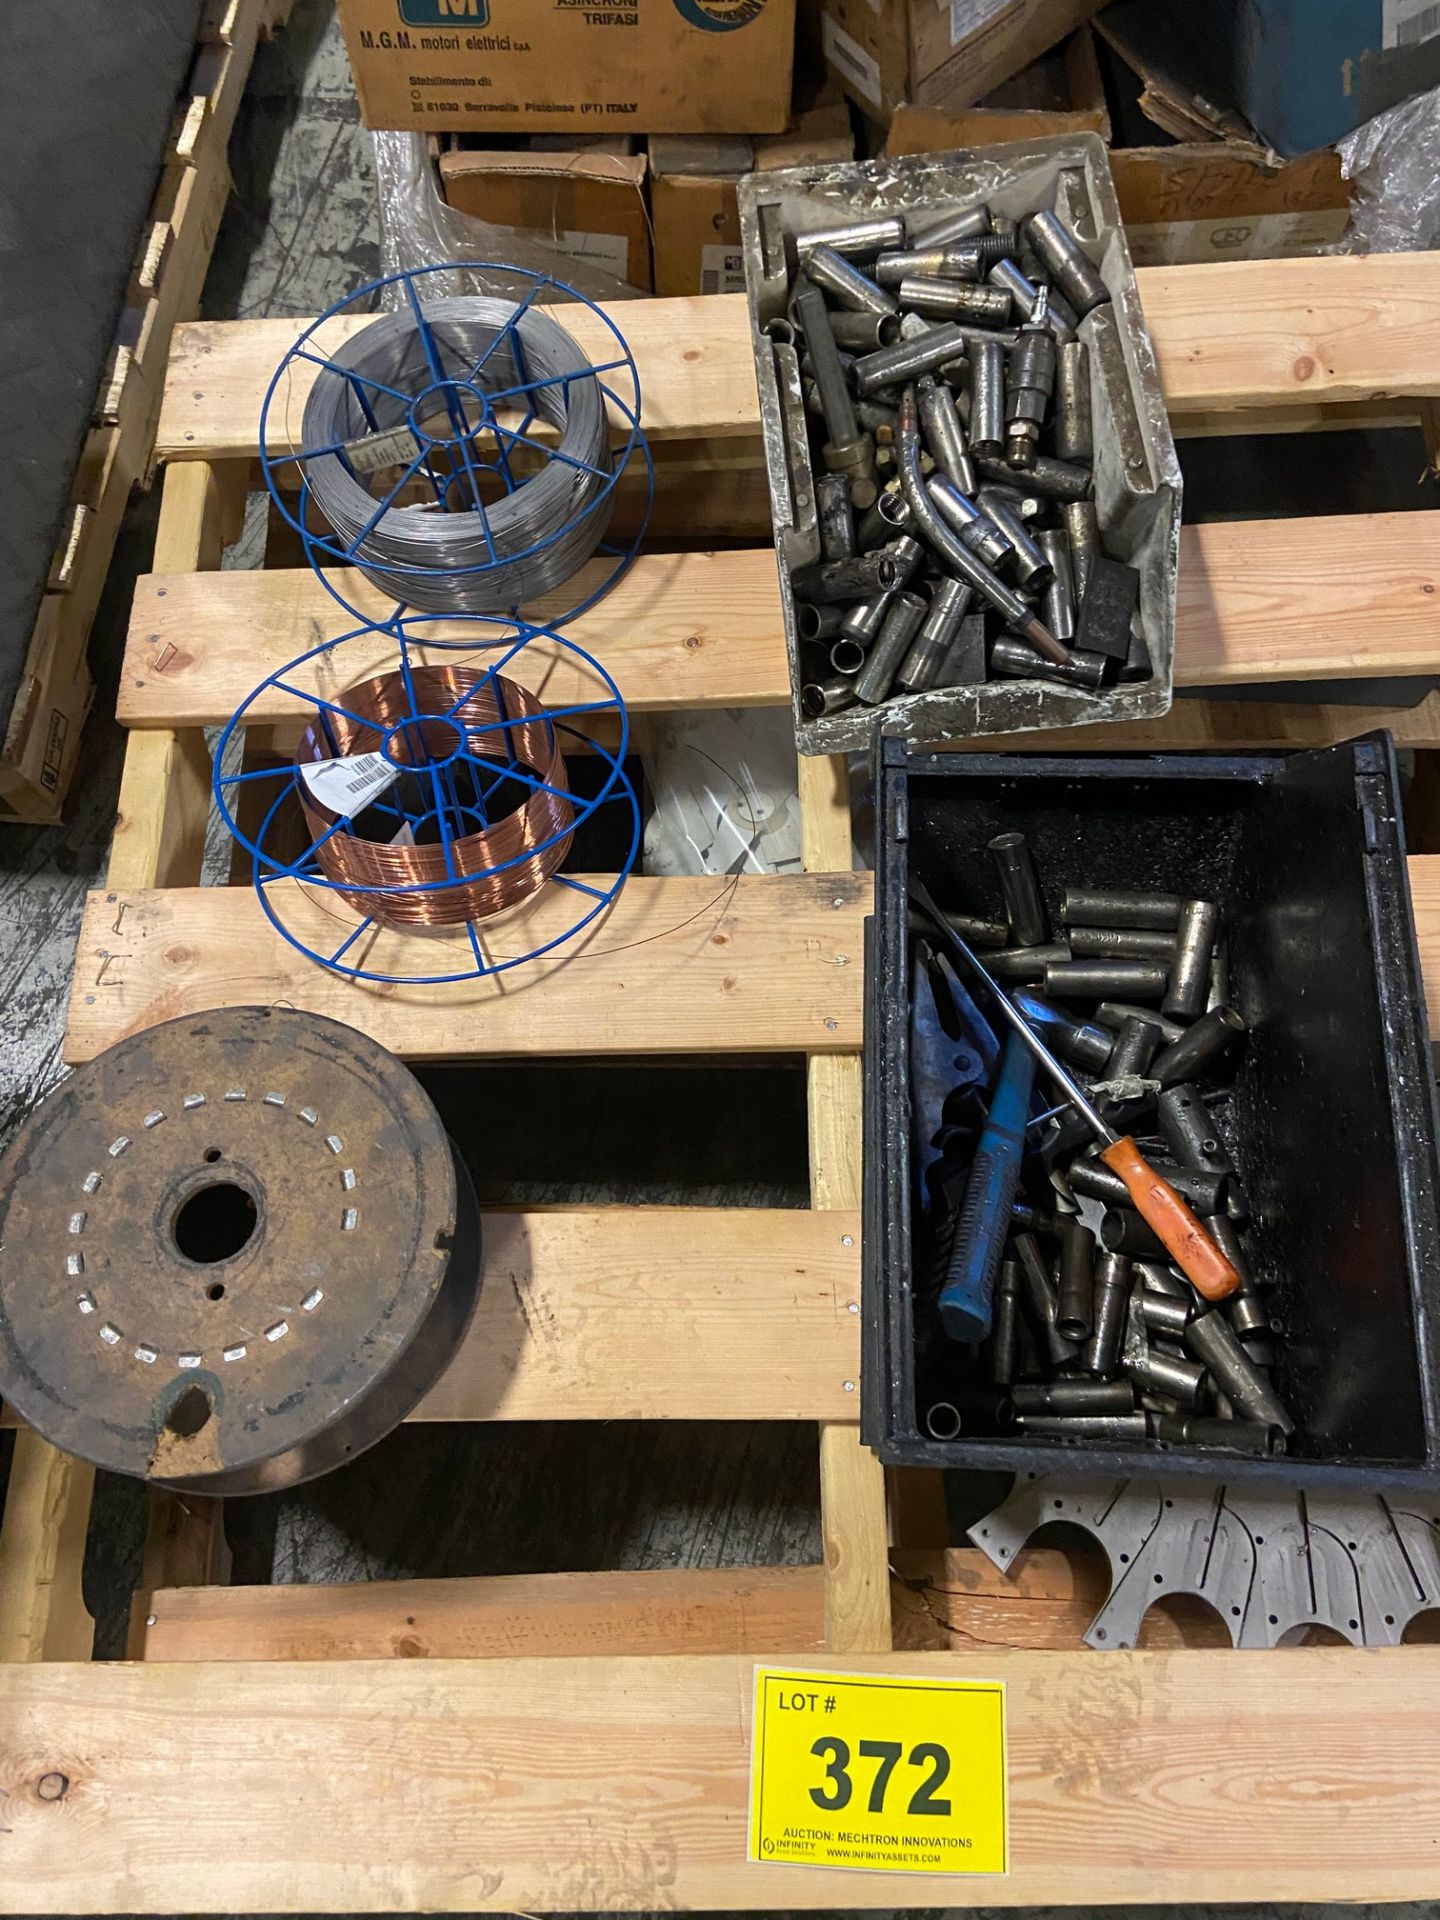 LOT (7) PALLETS OF ASSORTED TOOLING, ELECTRIC MOTORS, WELDING WIRE, FILTERS, CONTROL VALVES, CHAIN - Image 2 of 9